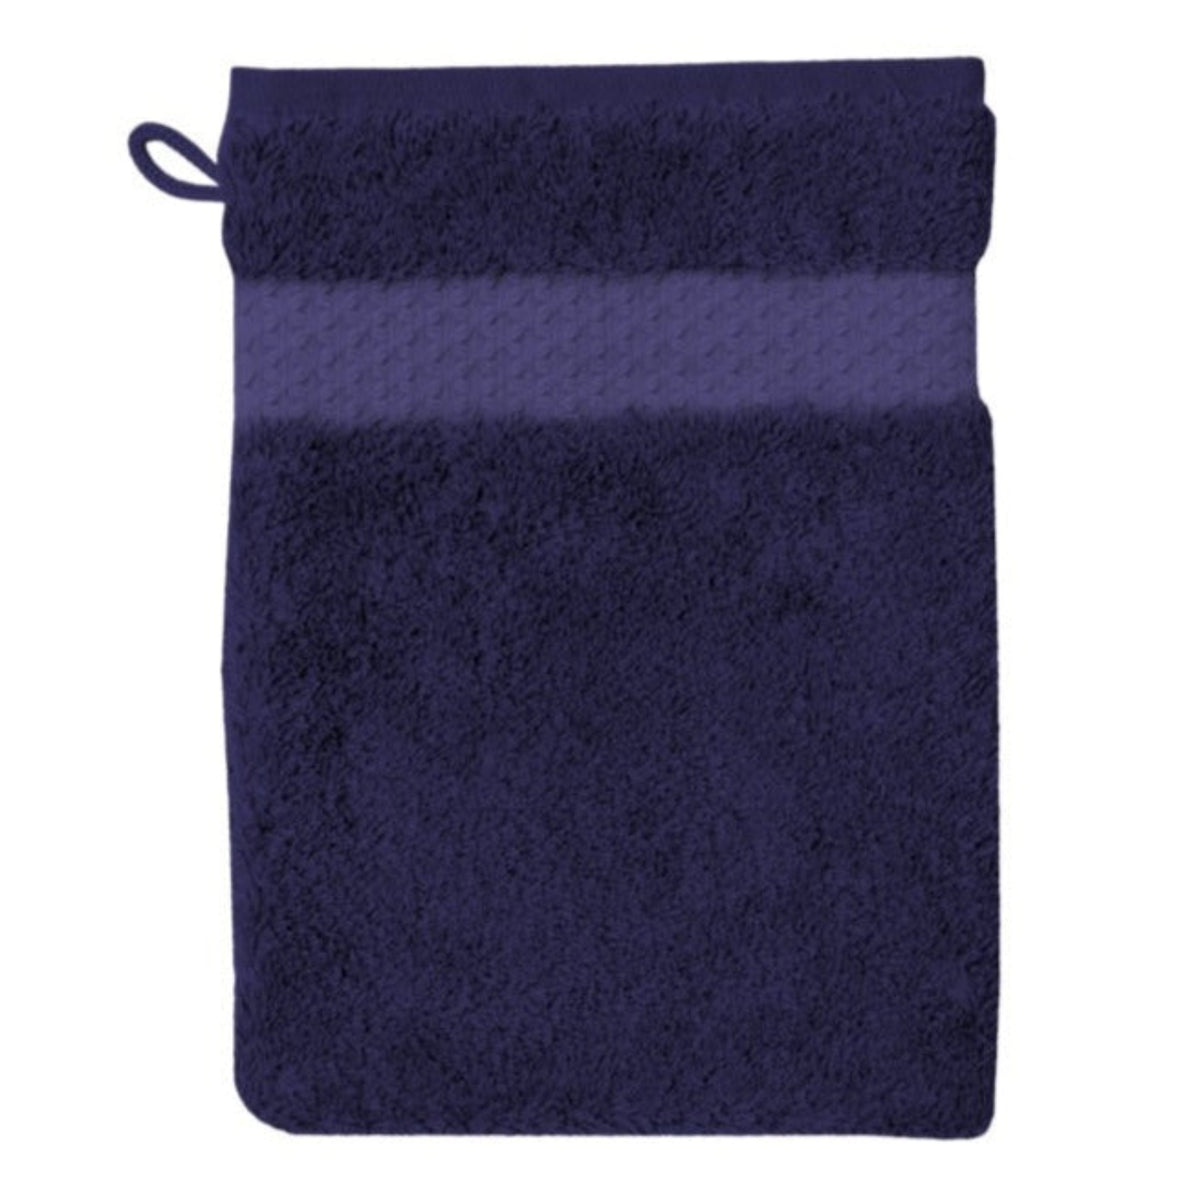 Bath Mitt of Yves Delorme Etoile Bath Collection in Marine Color